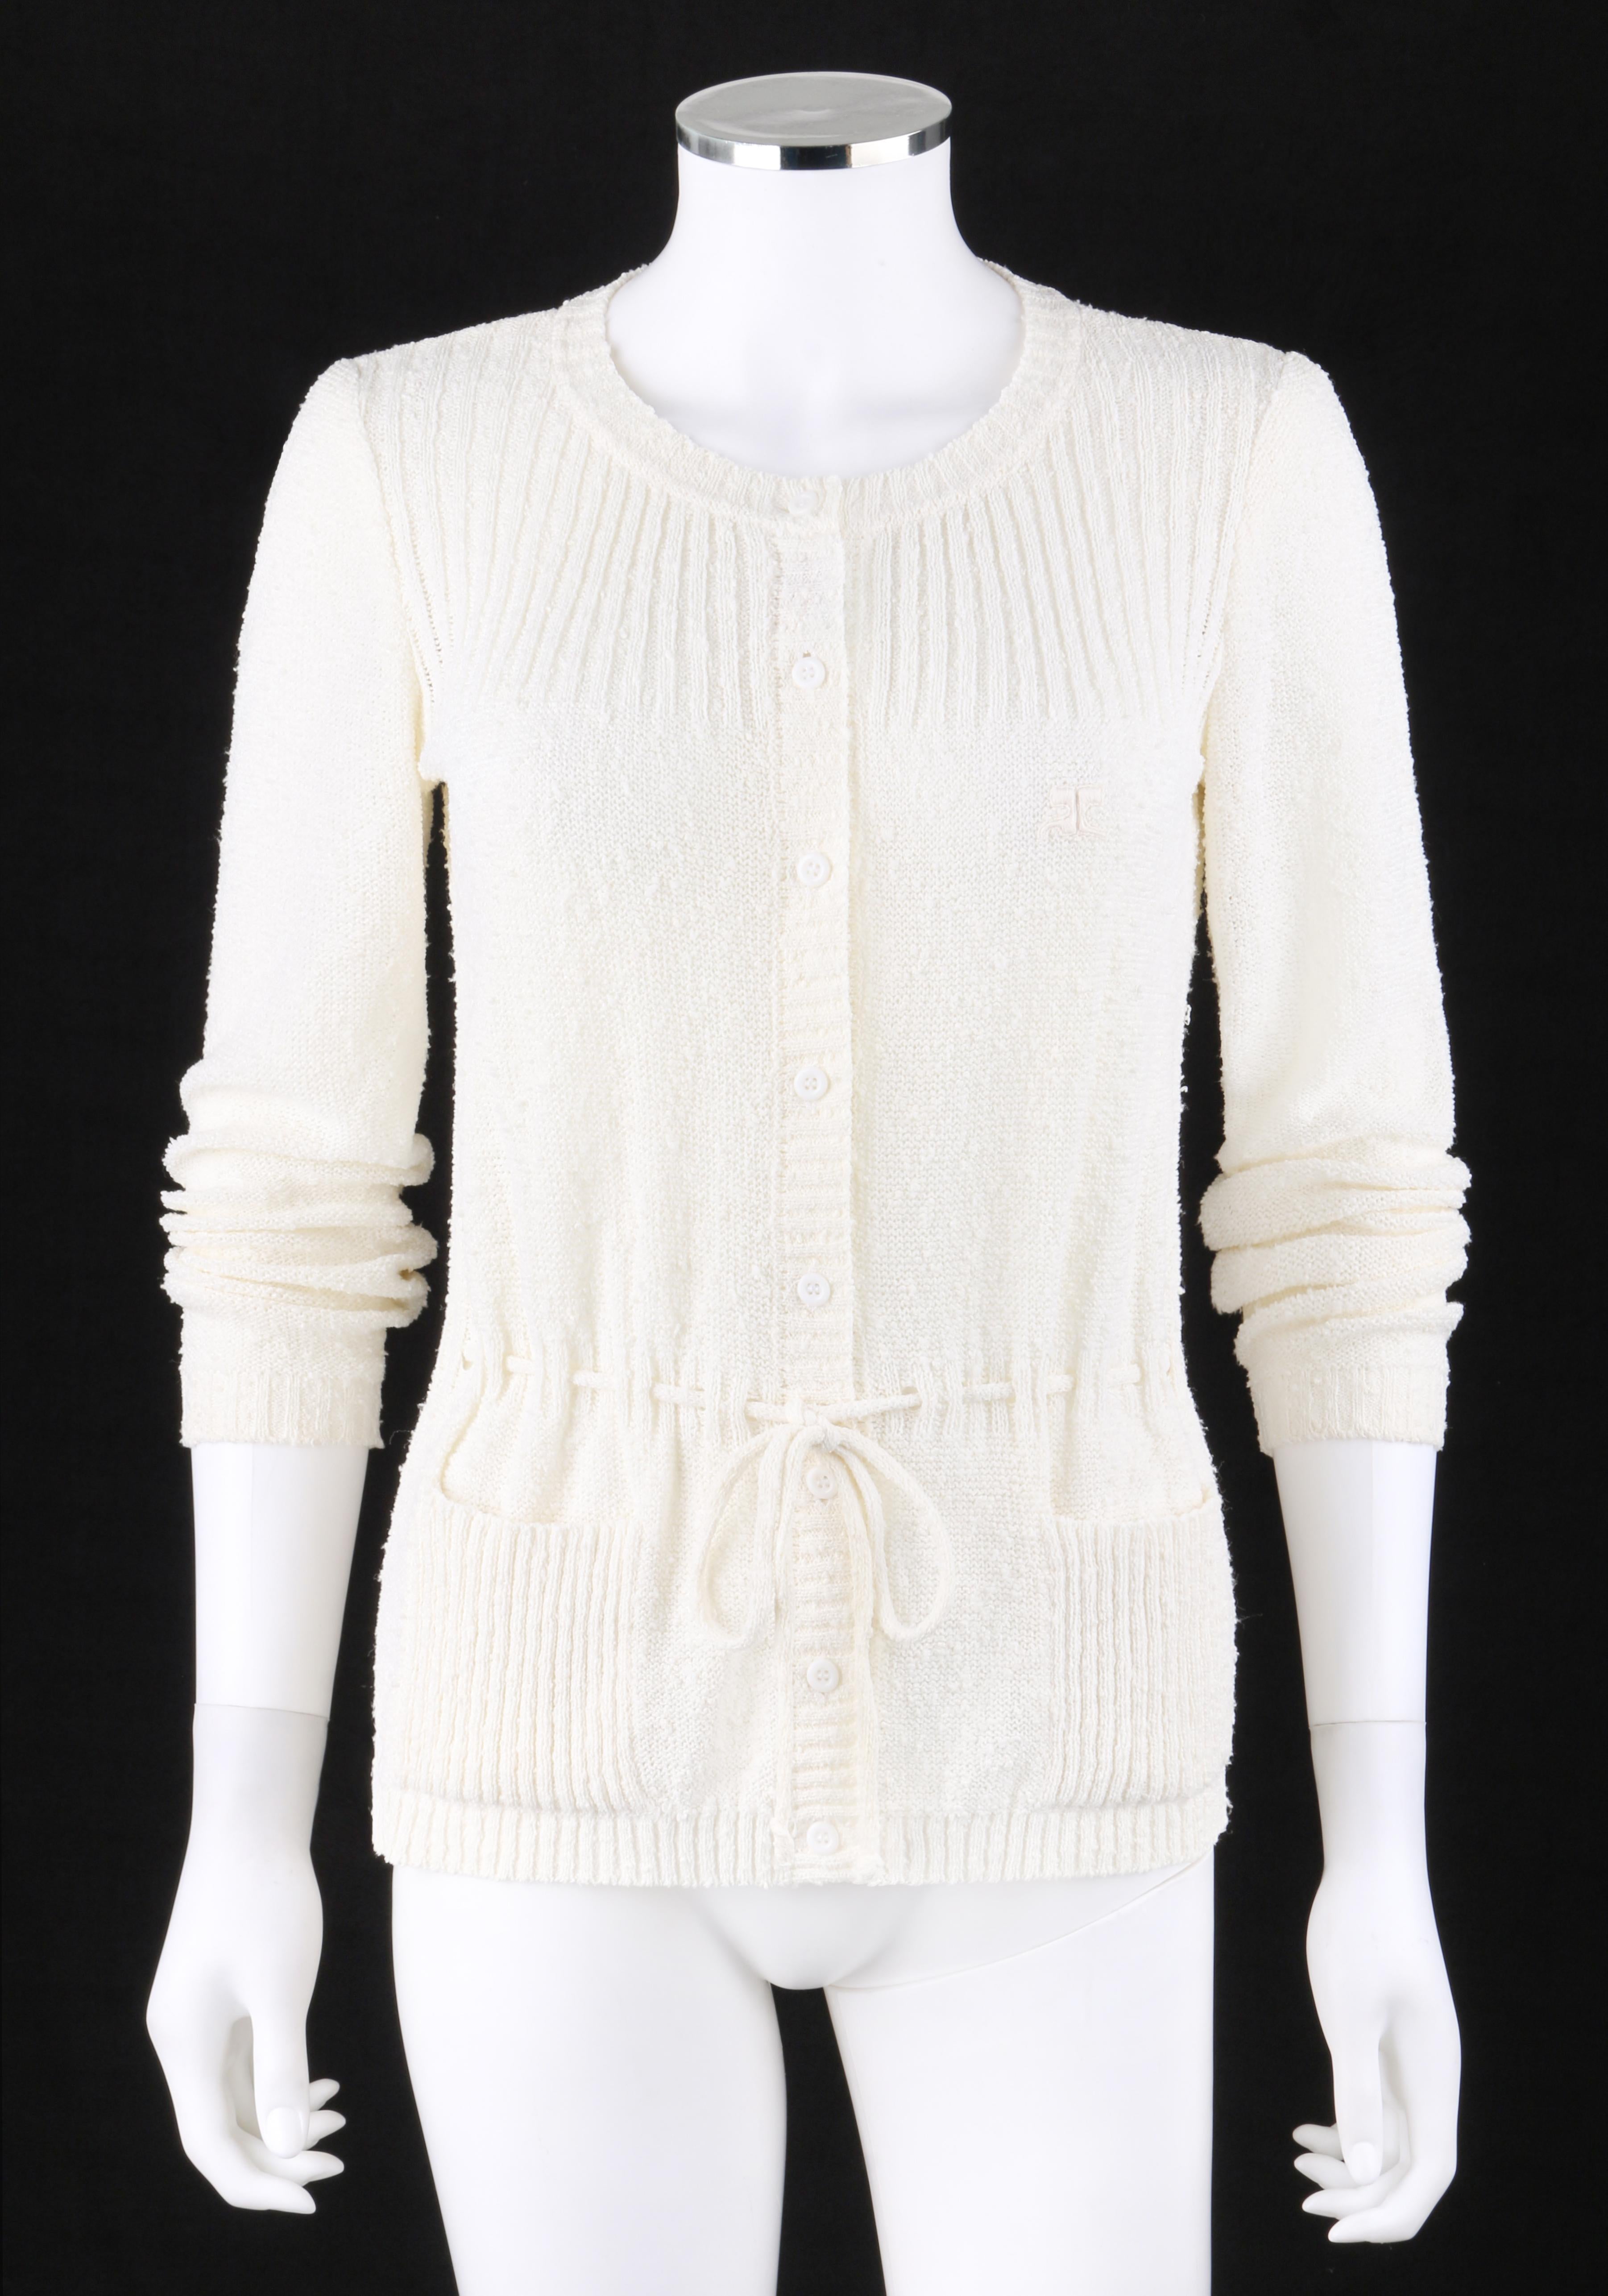 COURREGES c.1970-1980's Ivory Slub Knit Button-Up Long Sleeve Cardigan Sweater
 
Circa: c.1970's-1980's
Label(s): Courreges Paris 
Style: Cardigan sweater
Color(s): Ivory
Lined: No
Marked Fabric Content: Triacetate/polyester/polyamide
Additional